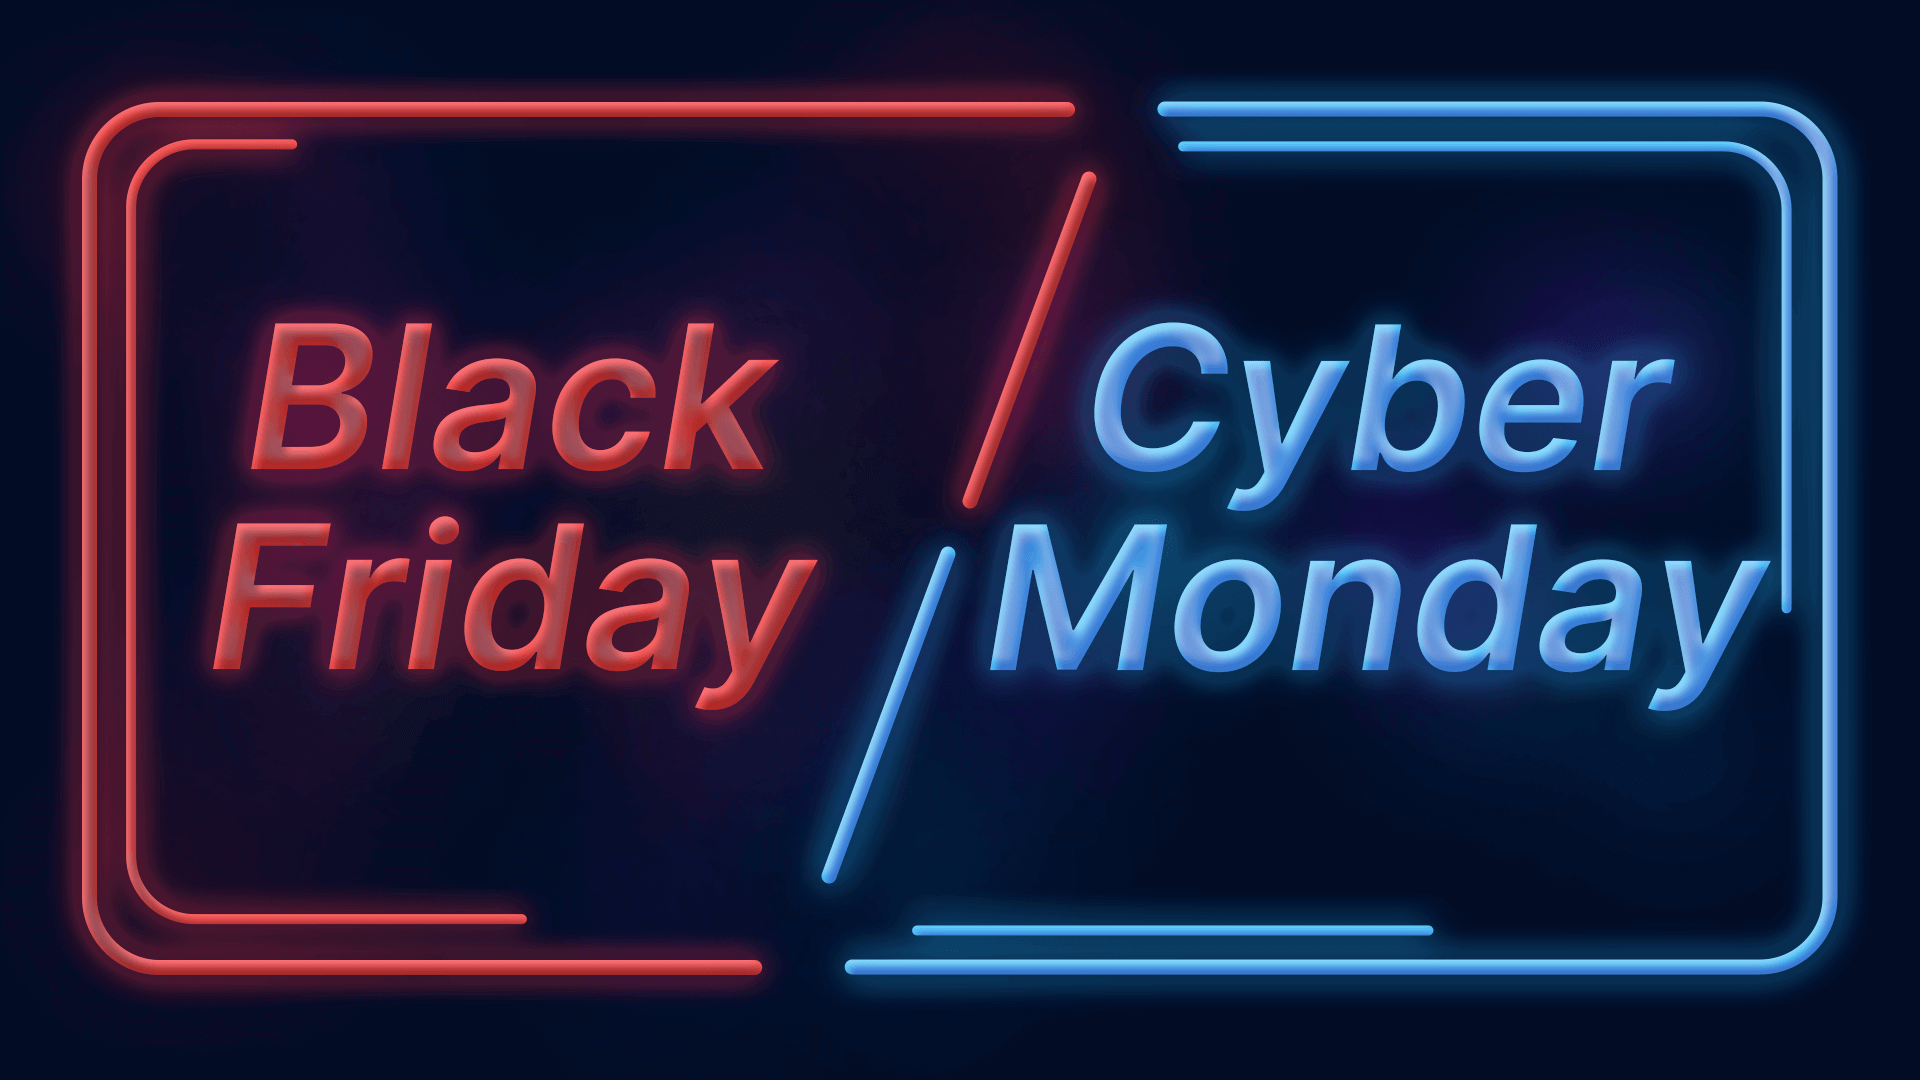 The deal of Black Friday and Cyber Monday